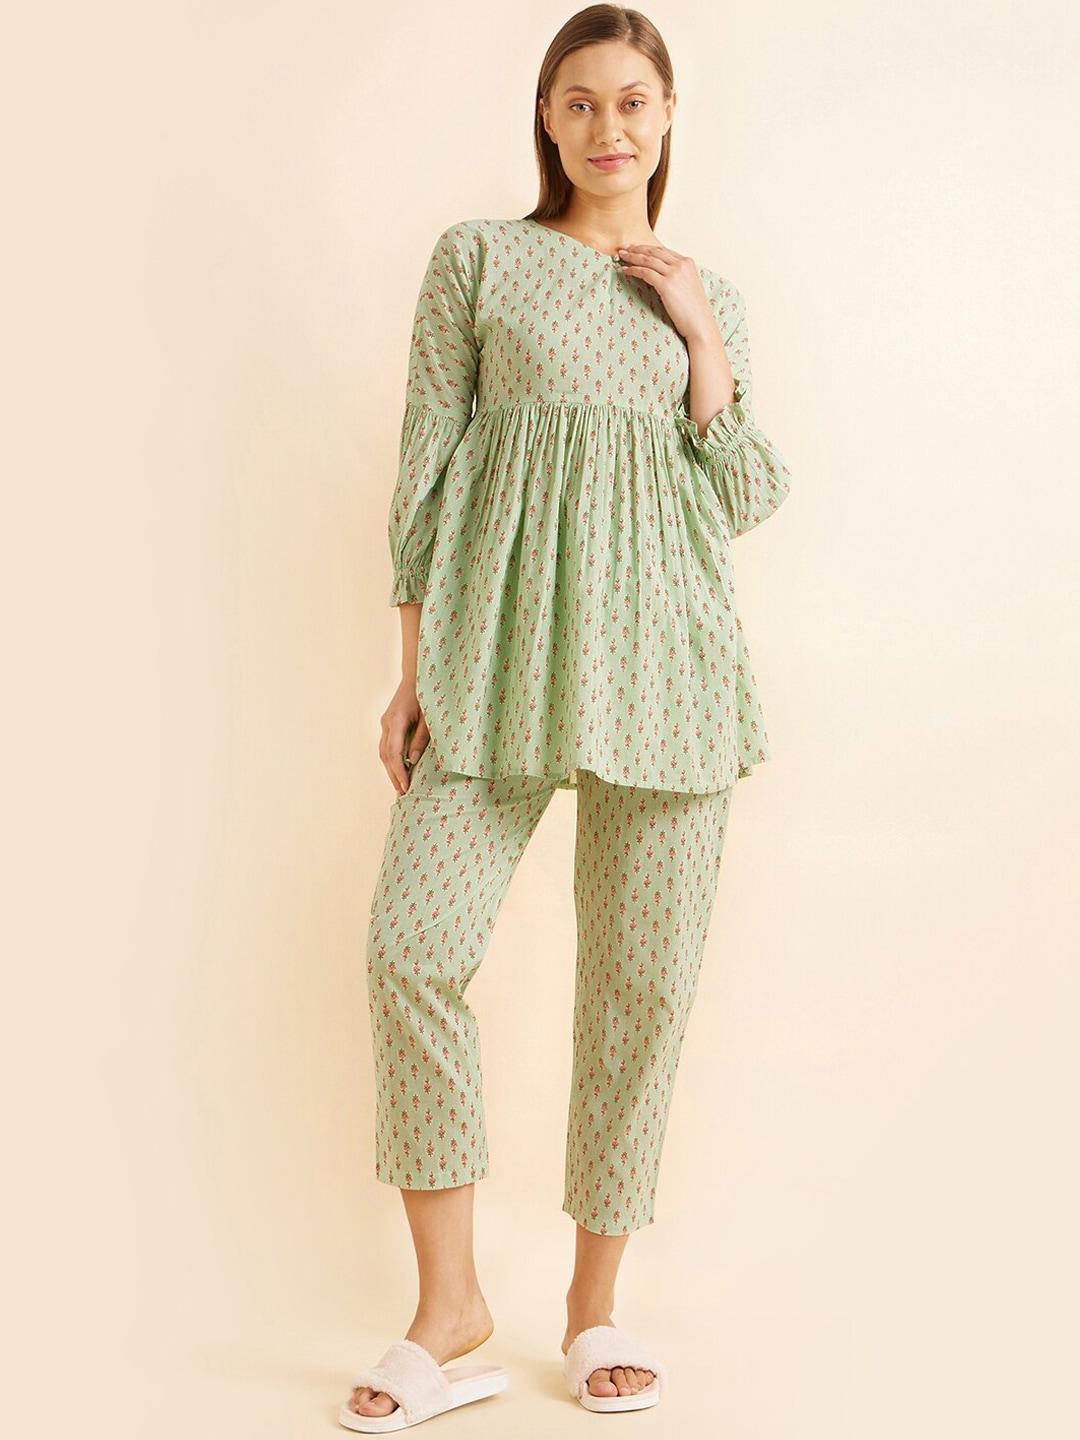 sweet-dreams-green-&-pink-ethnic-motifs-printed-pure-cotton-night-suit